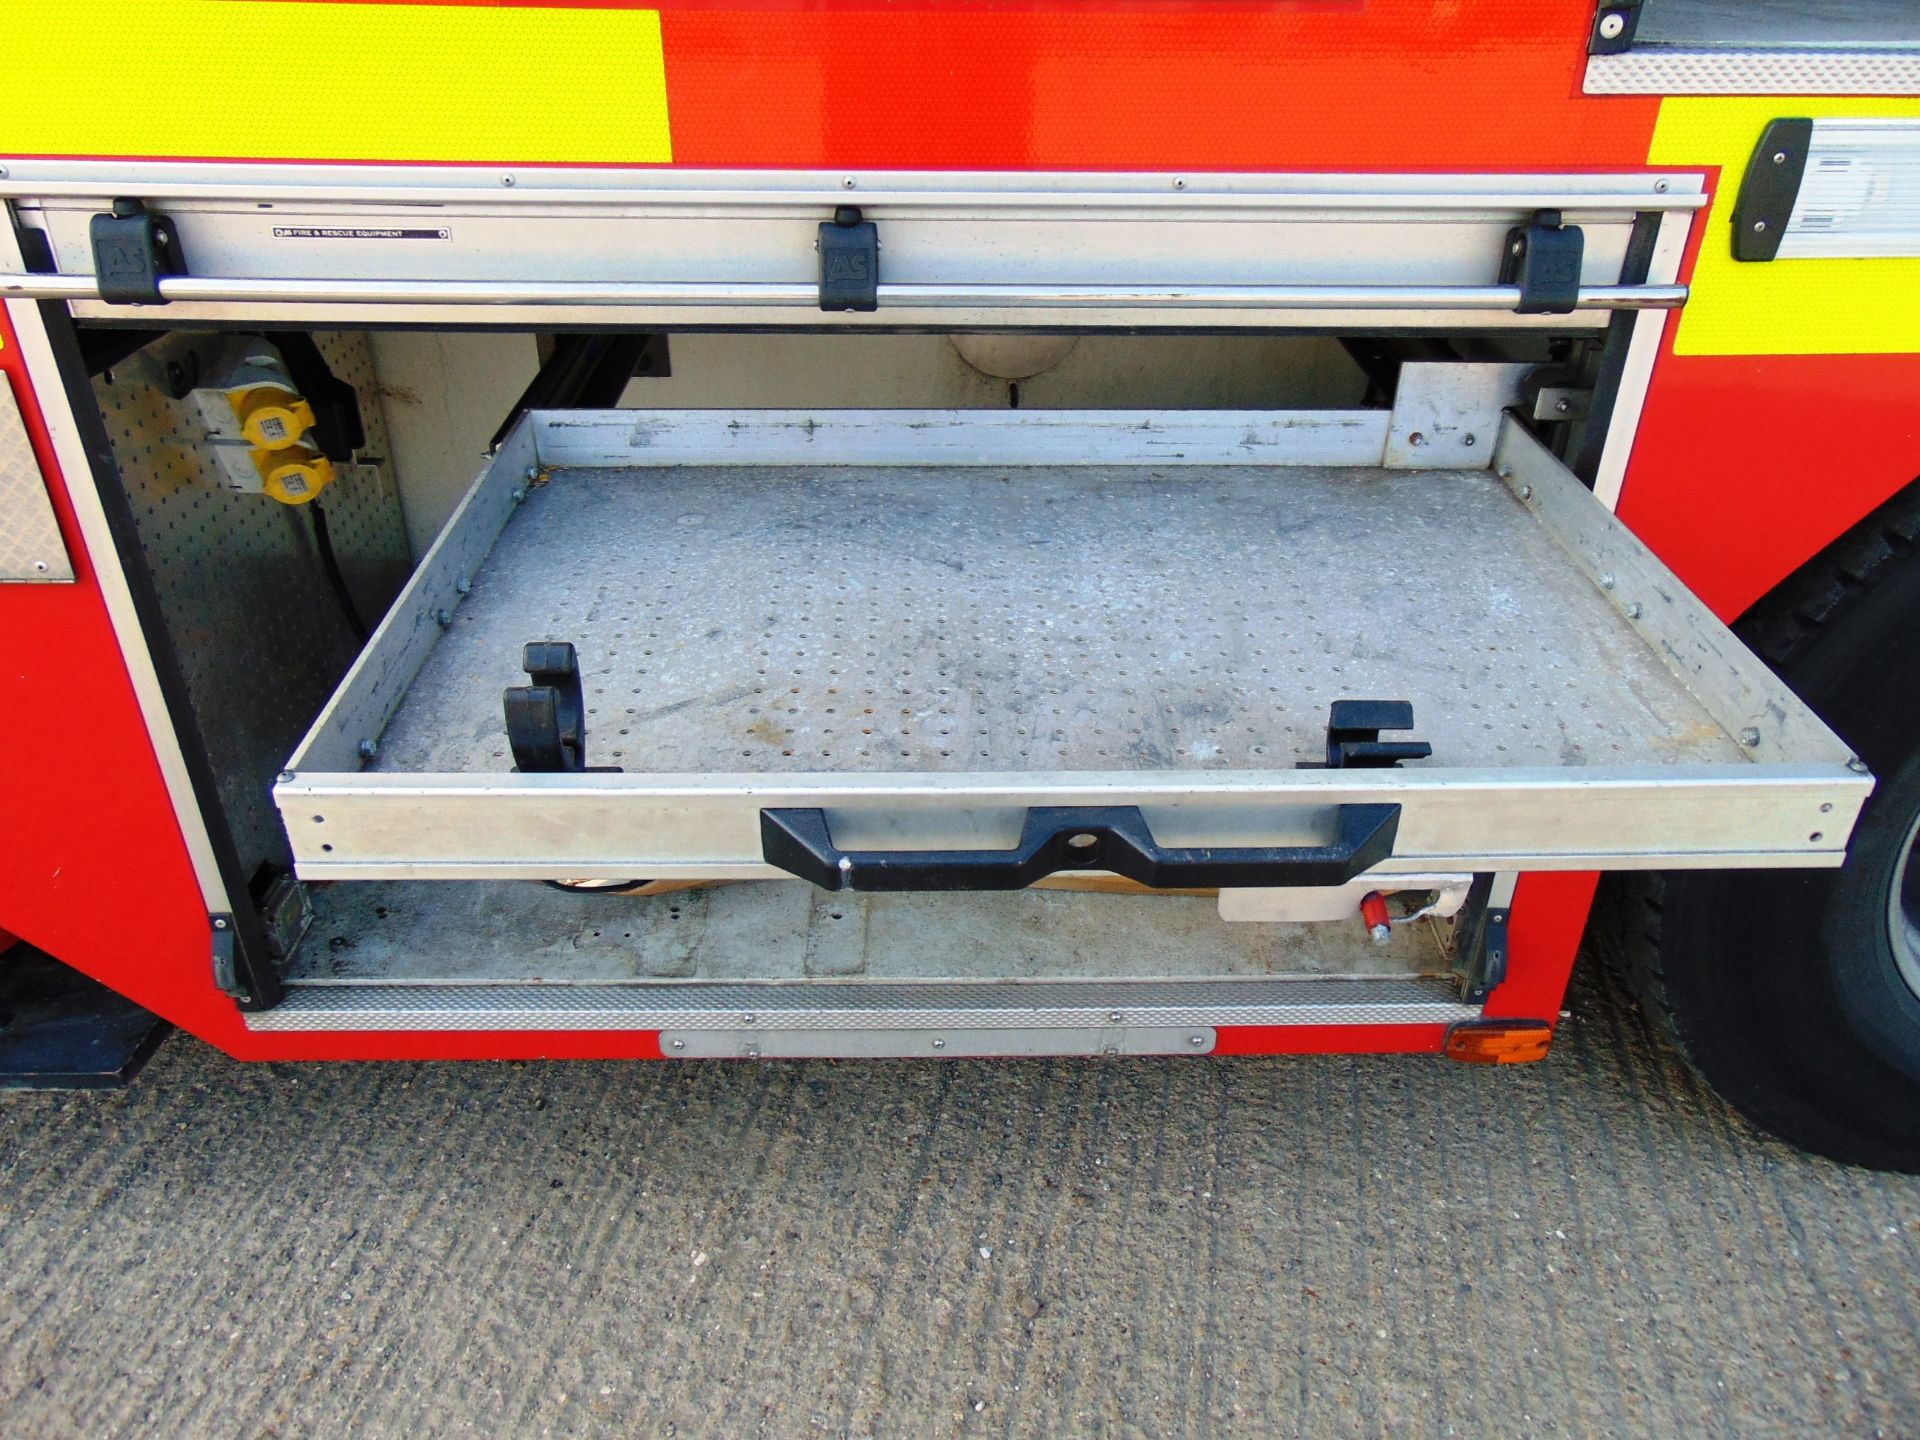 2008 Mercedes Econic CARP (Combined Aerial Rescue Pump) 6x2 Aerial Work Platform / Fire Appliance - Image 38 of 49